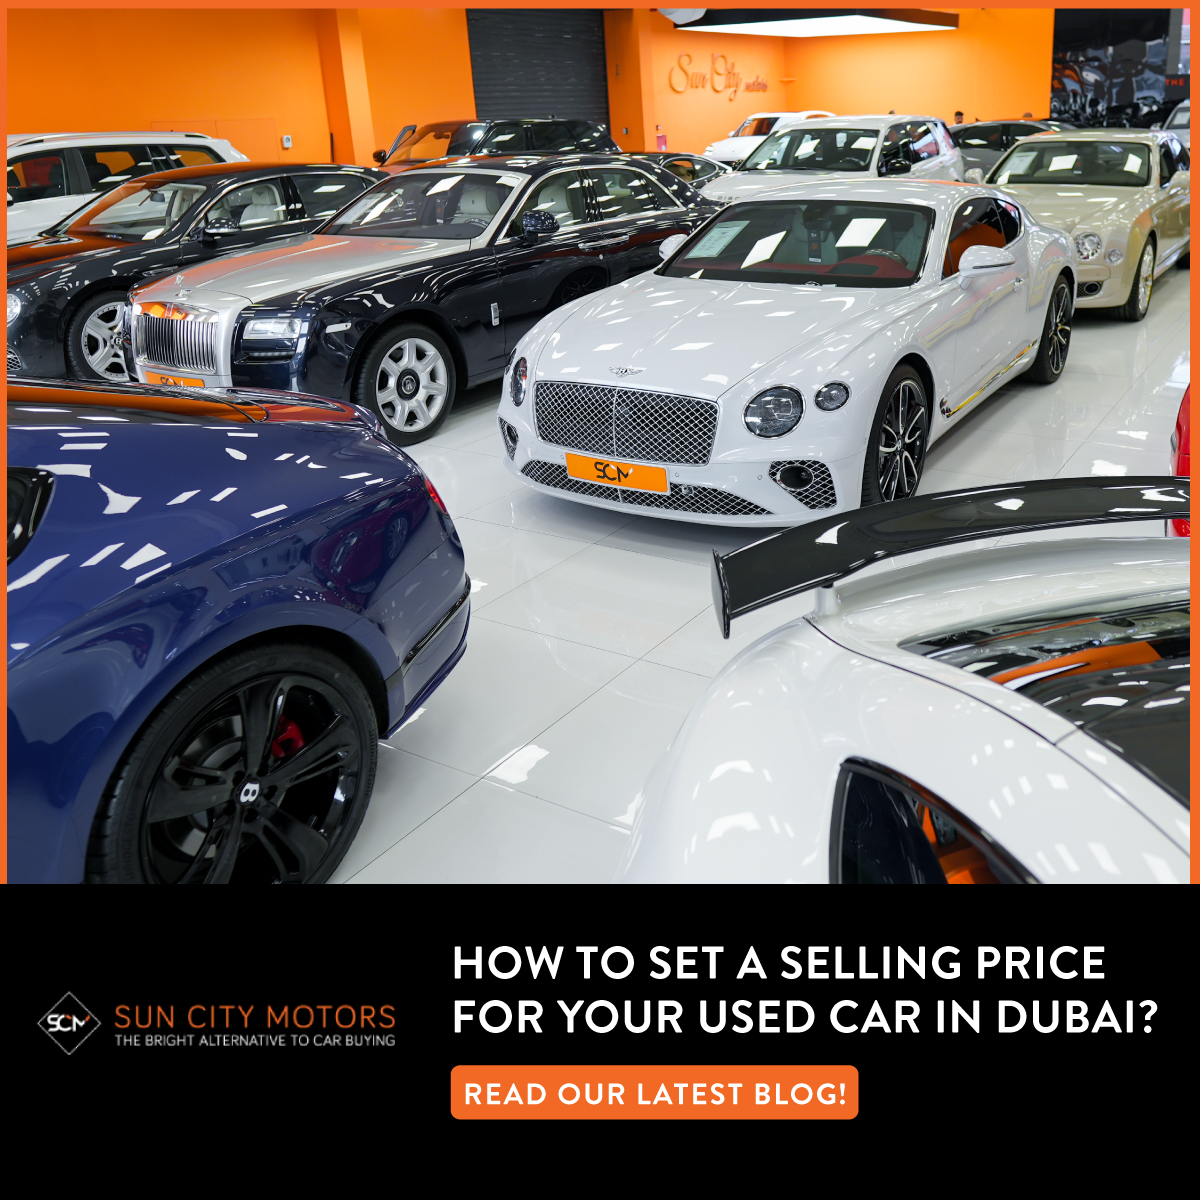 How to Set a Selling Price for Your Used Car in Dubai?